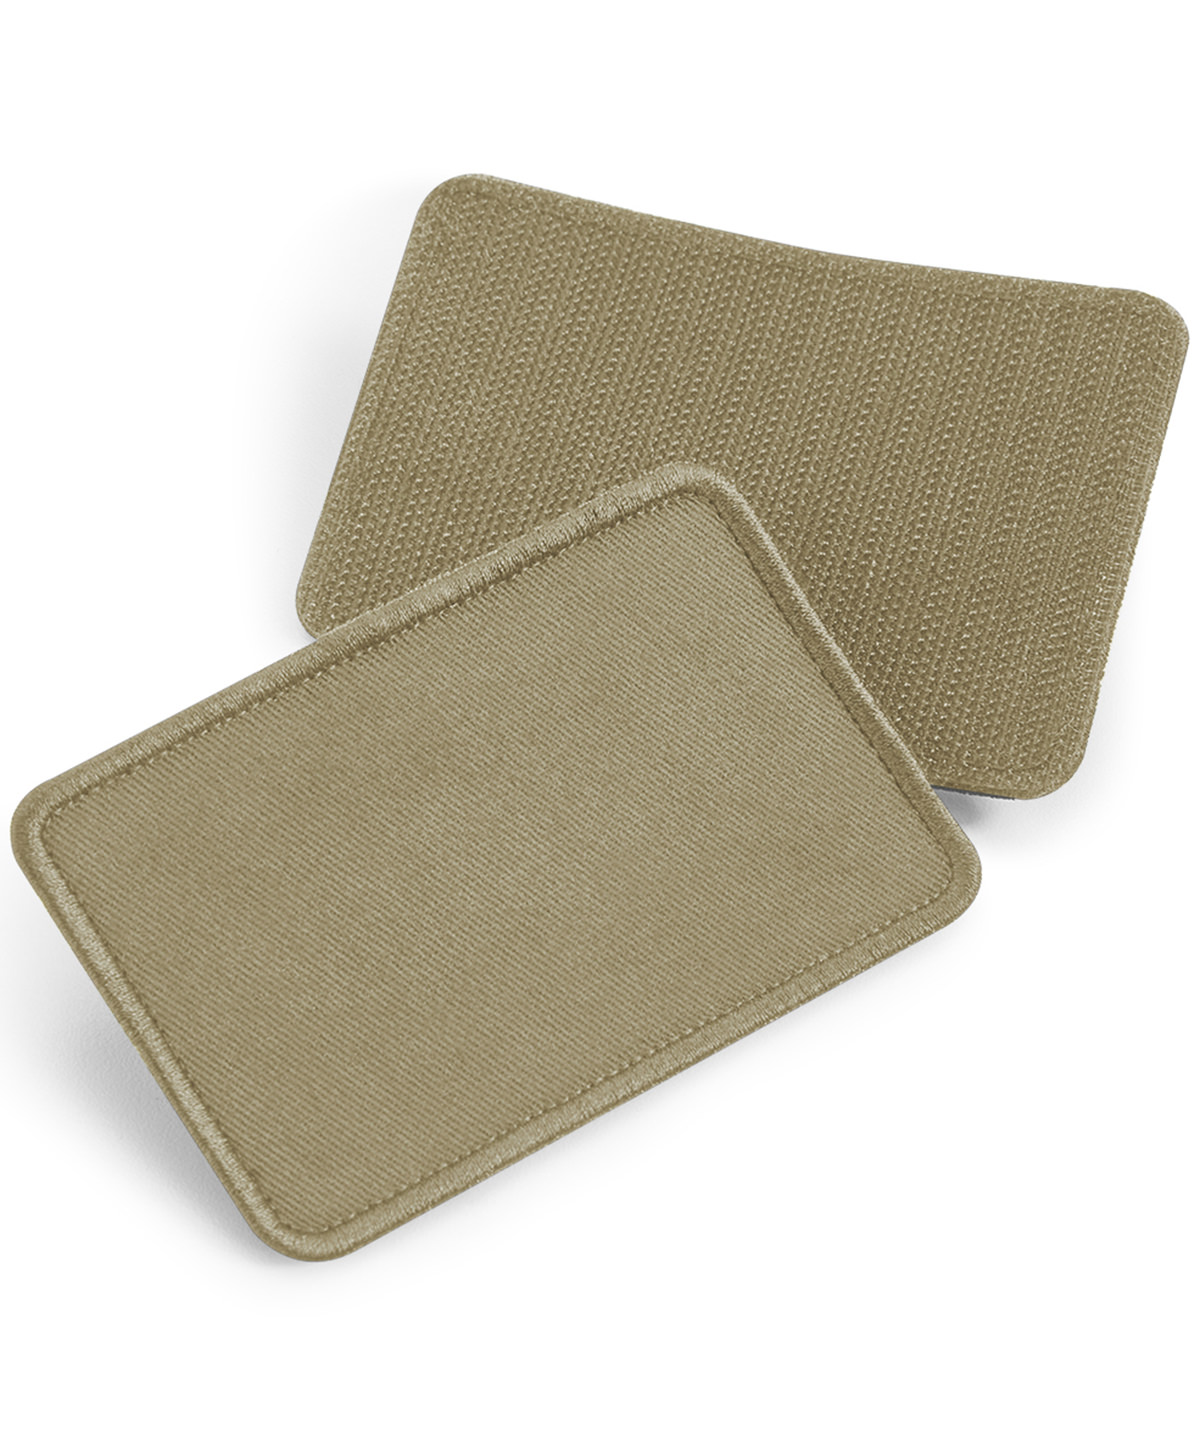 Cotton Removable Patch Desert Sand Size One Size